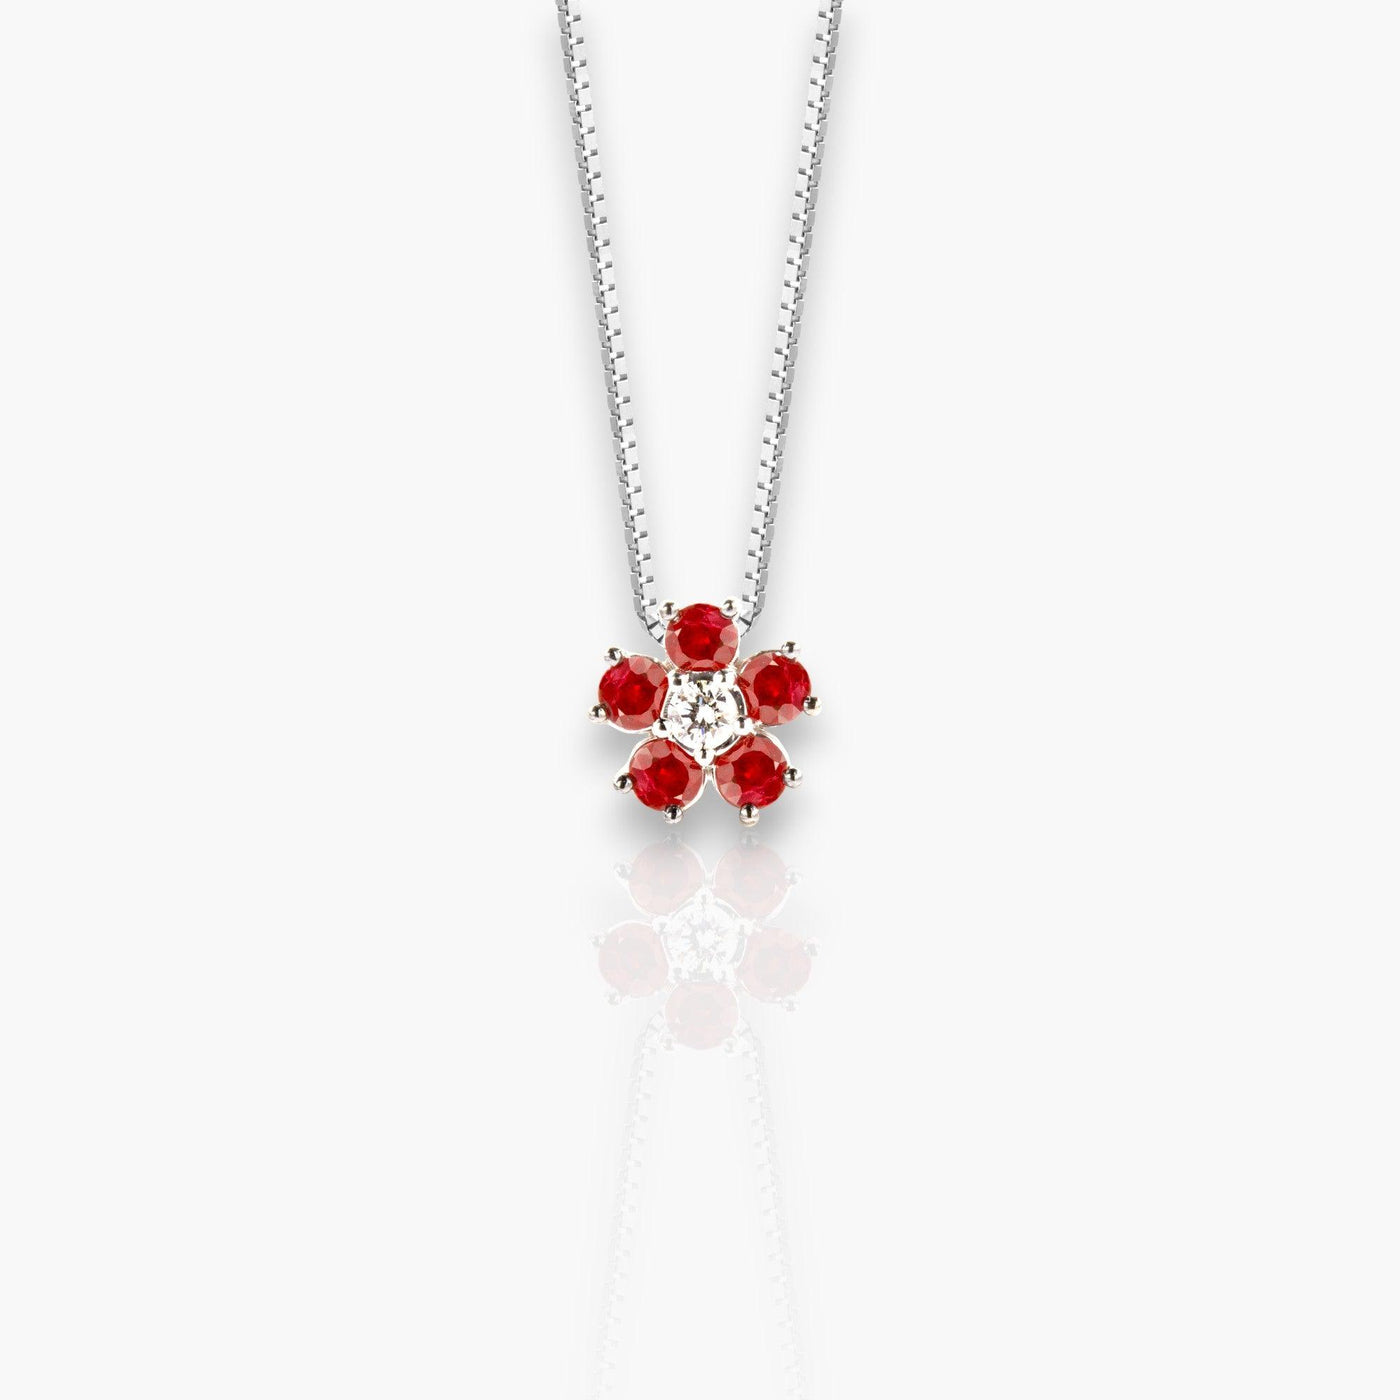 Necklace with red ruby flower